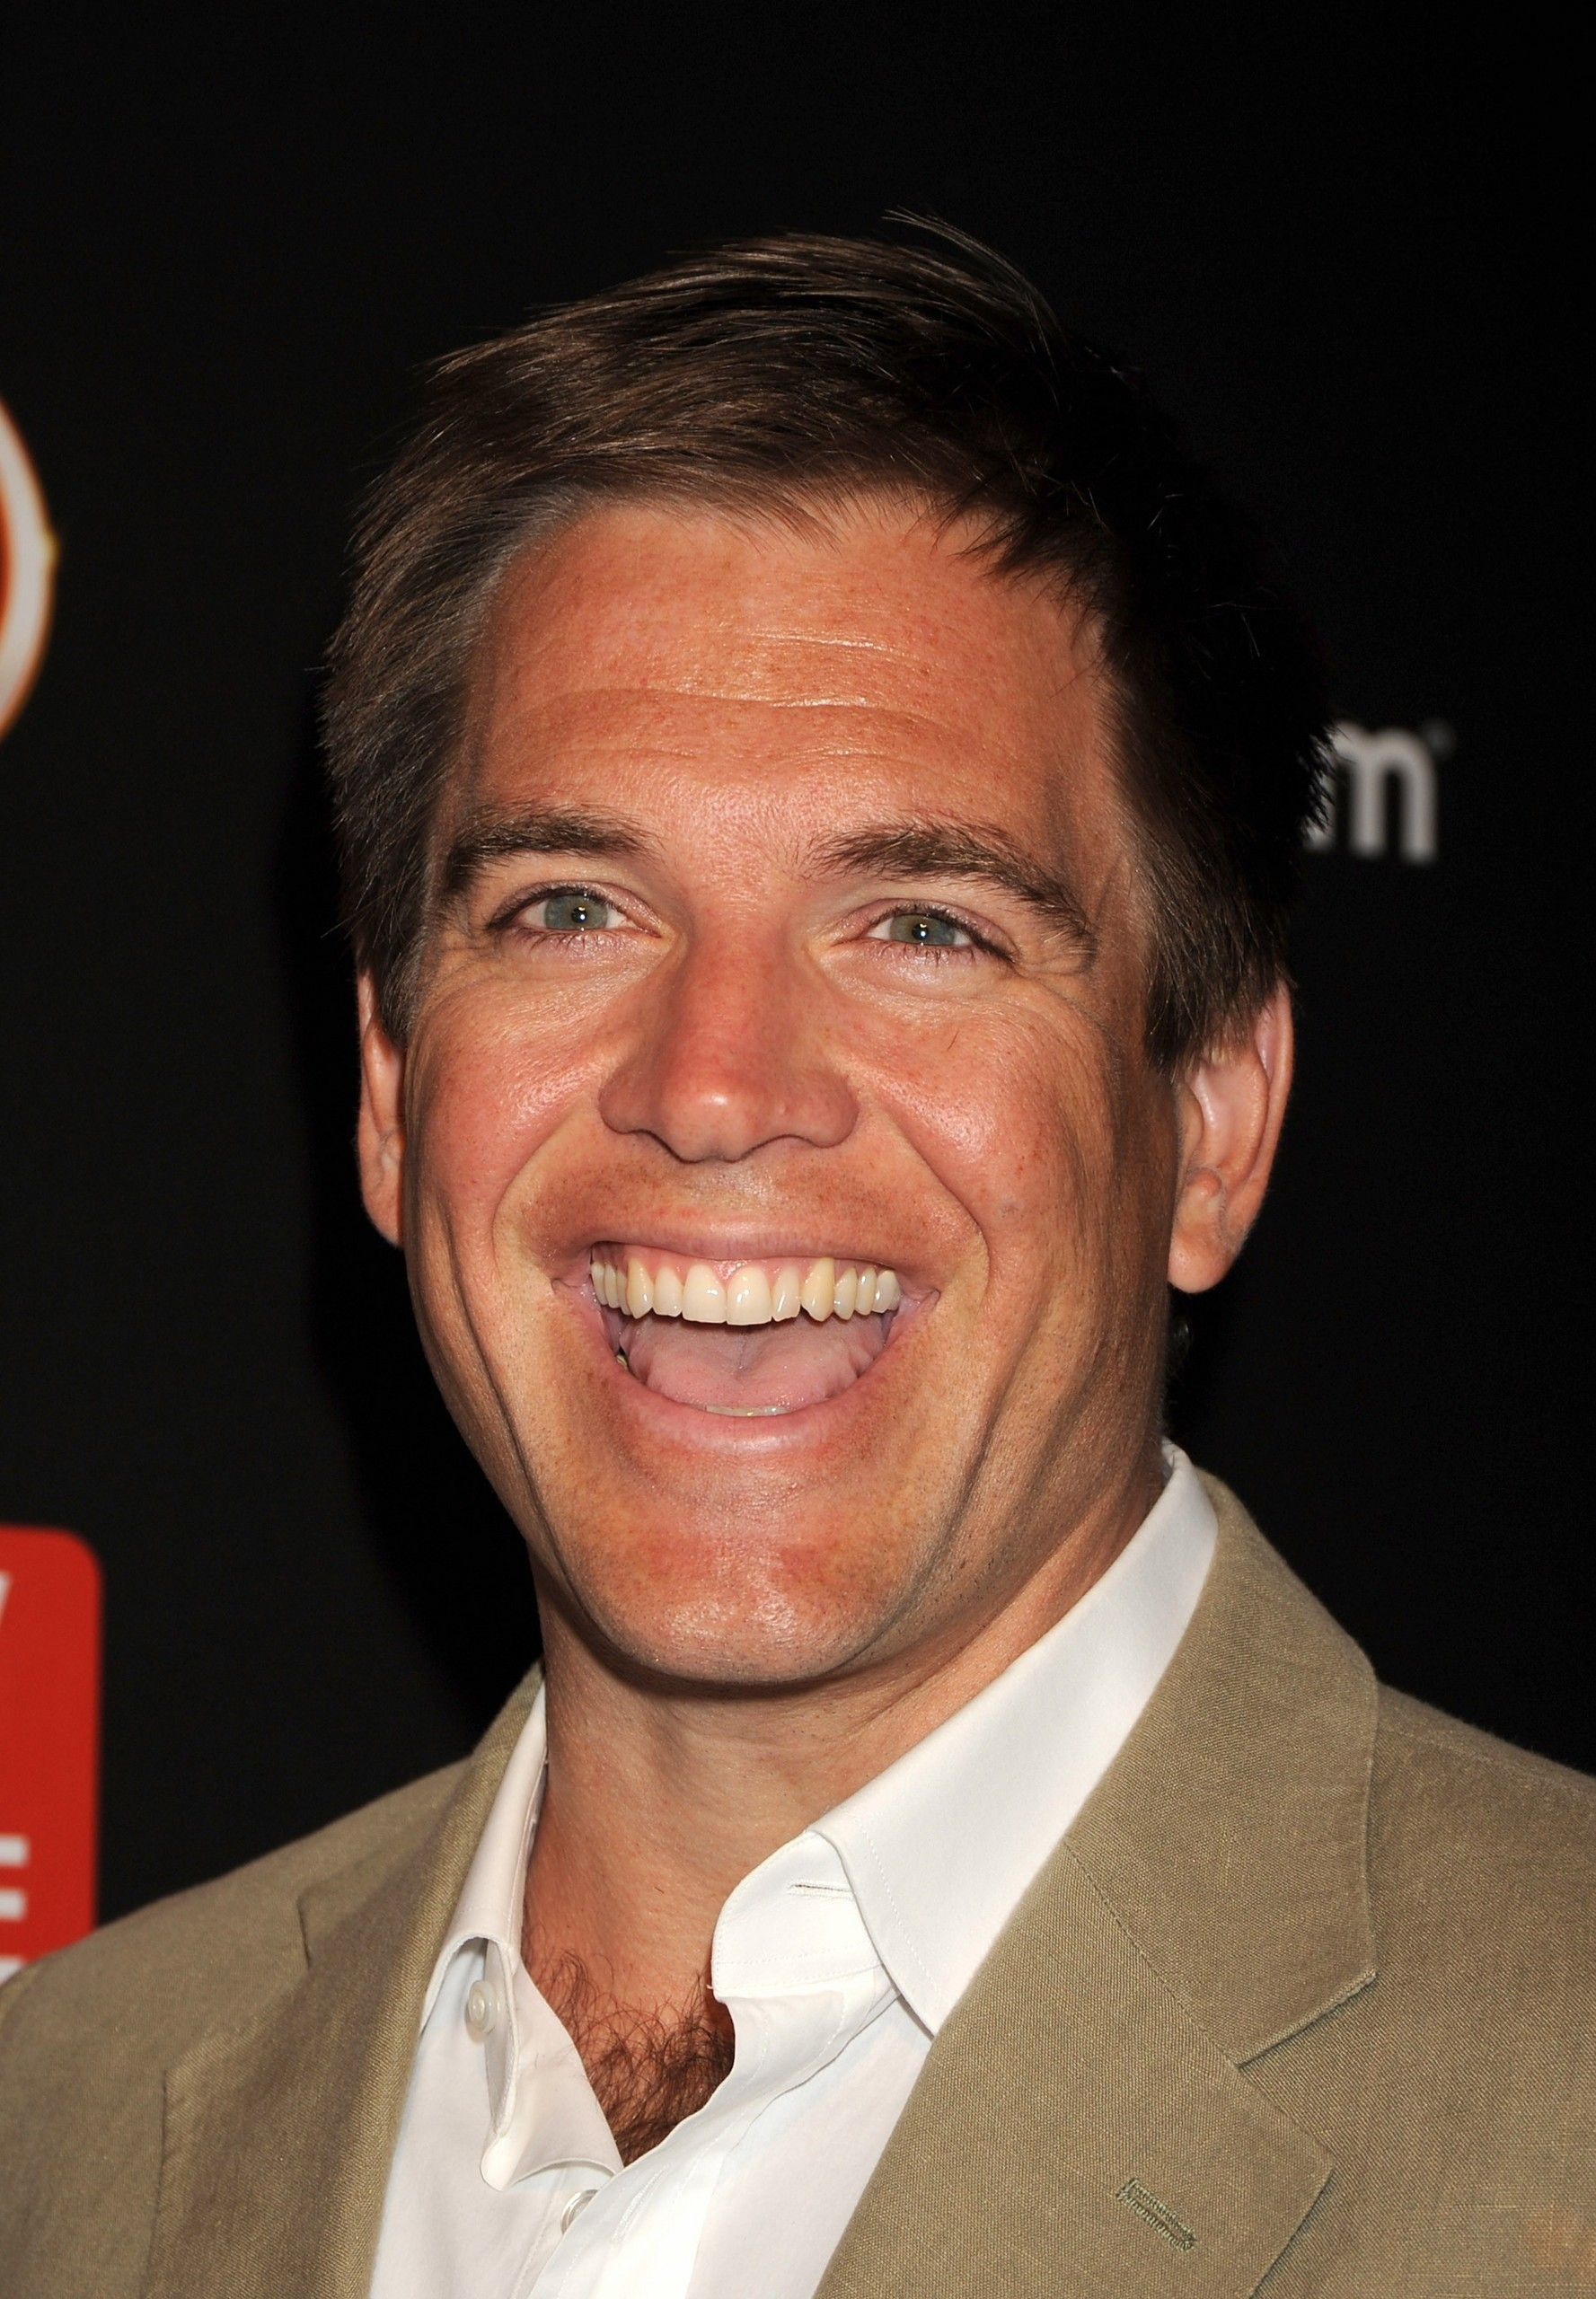 Special Agent Anthony DiNozzo Weatherly NCIS. Michael weatherly, Ncis, Weatherly